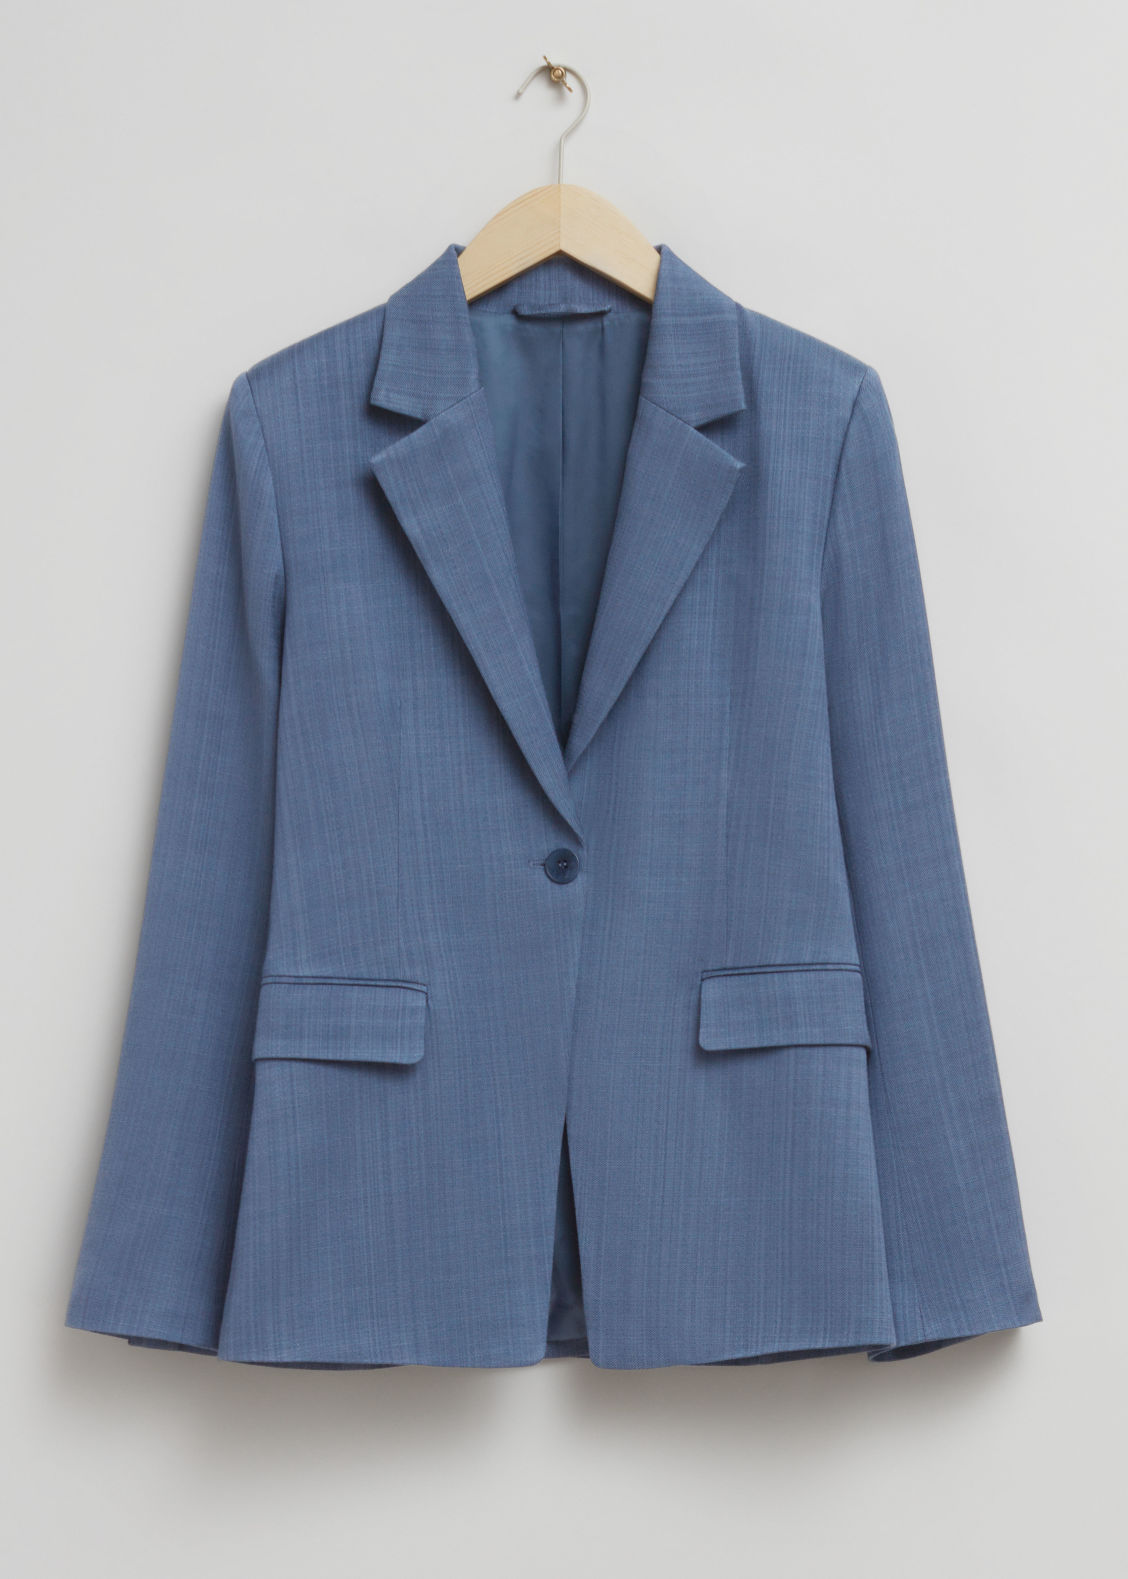 H&M's Single-Breasted Blazer Is Sure to Sell Out Again, Fast | Who What ...